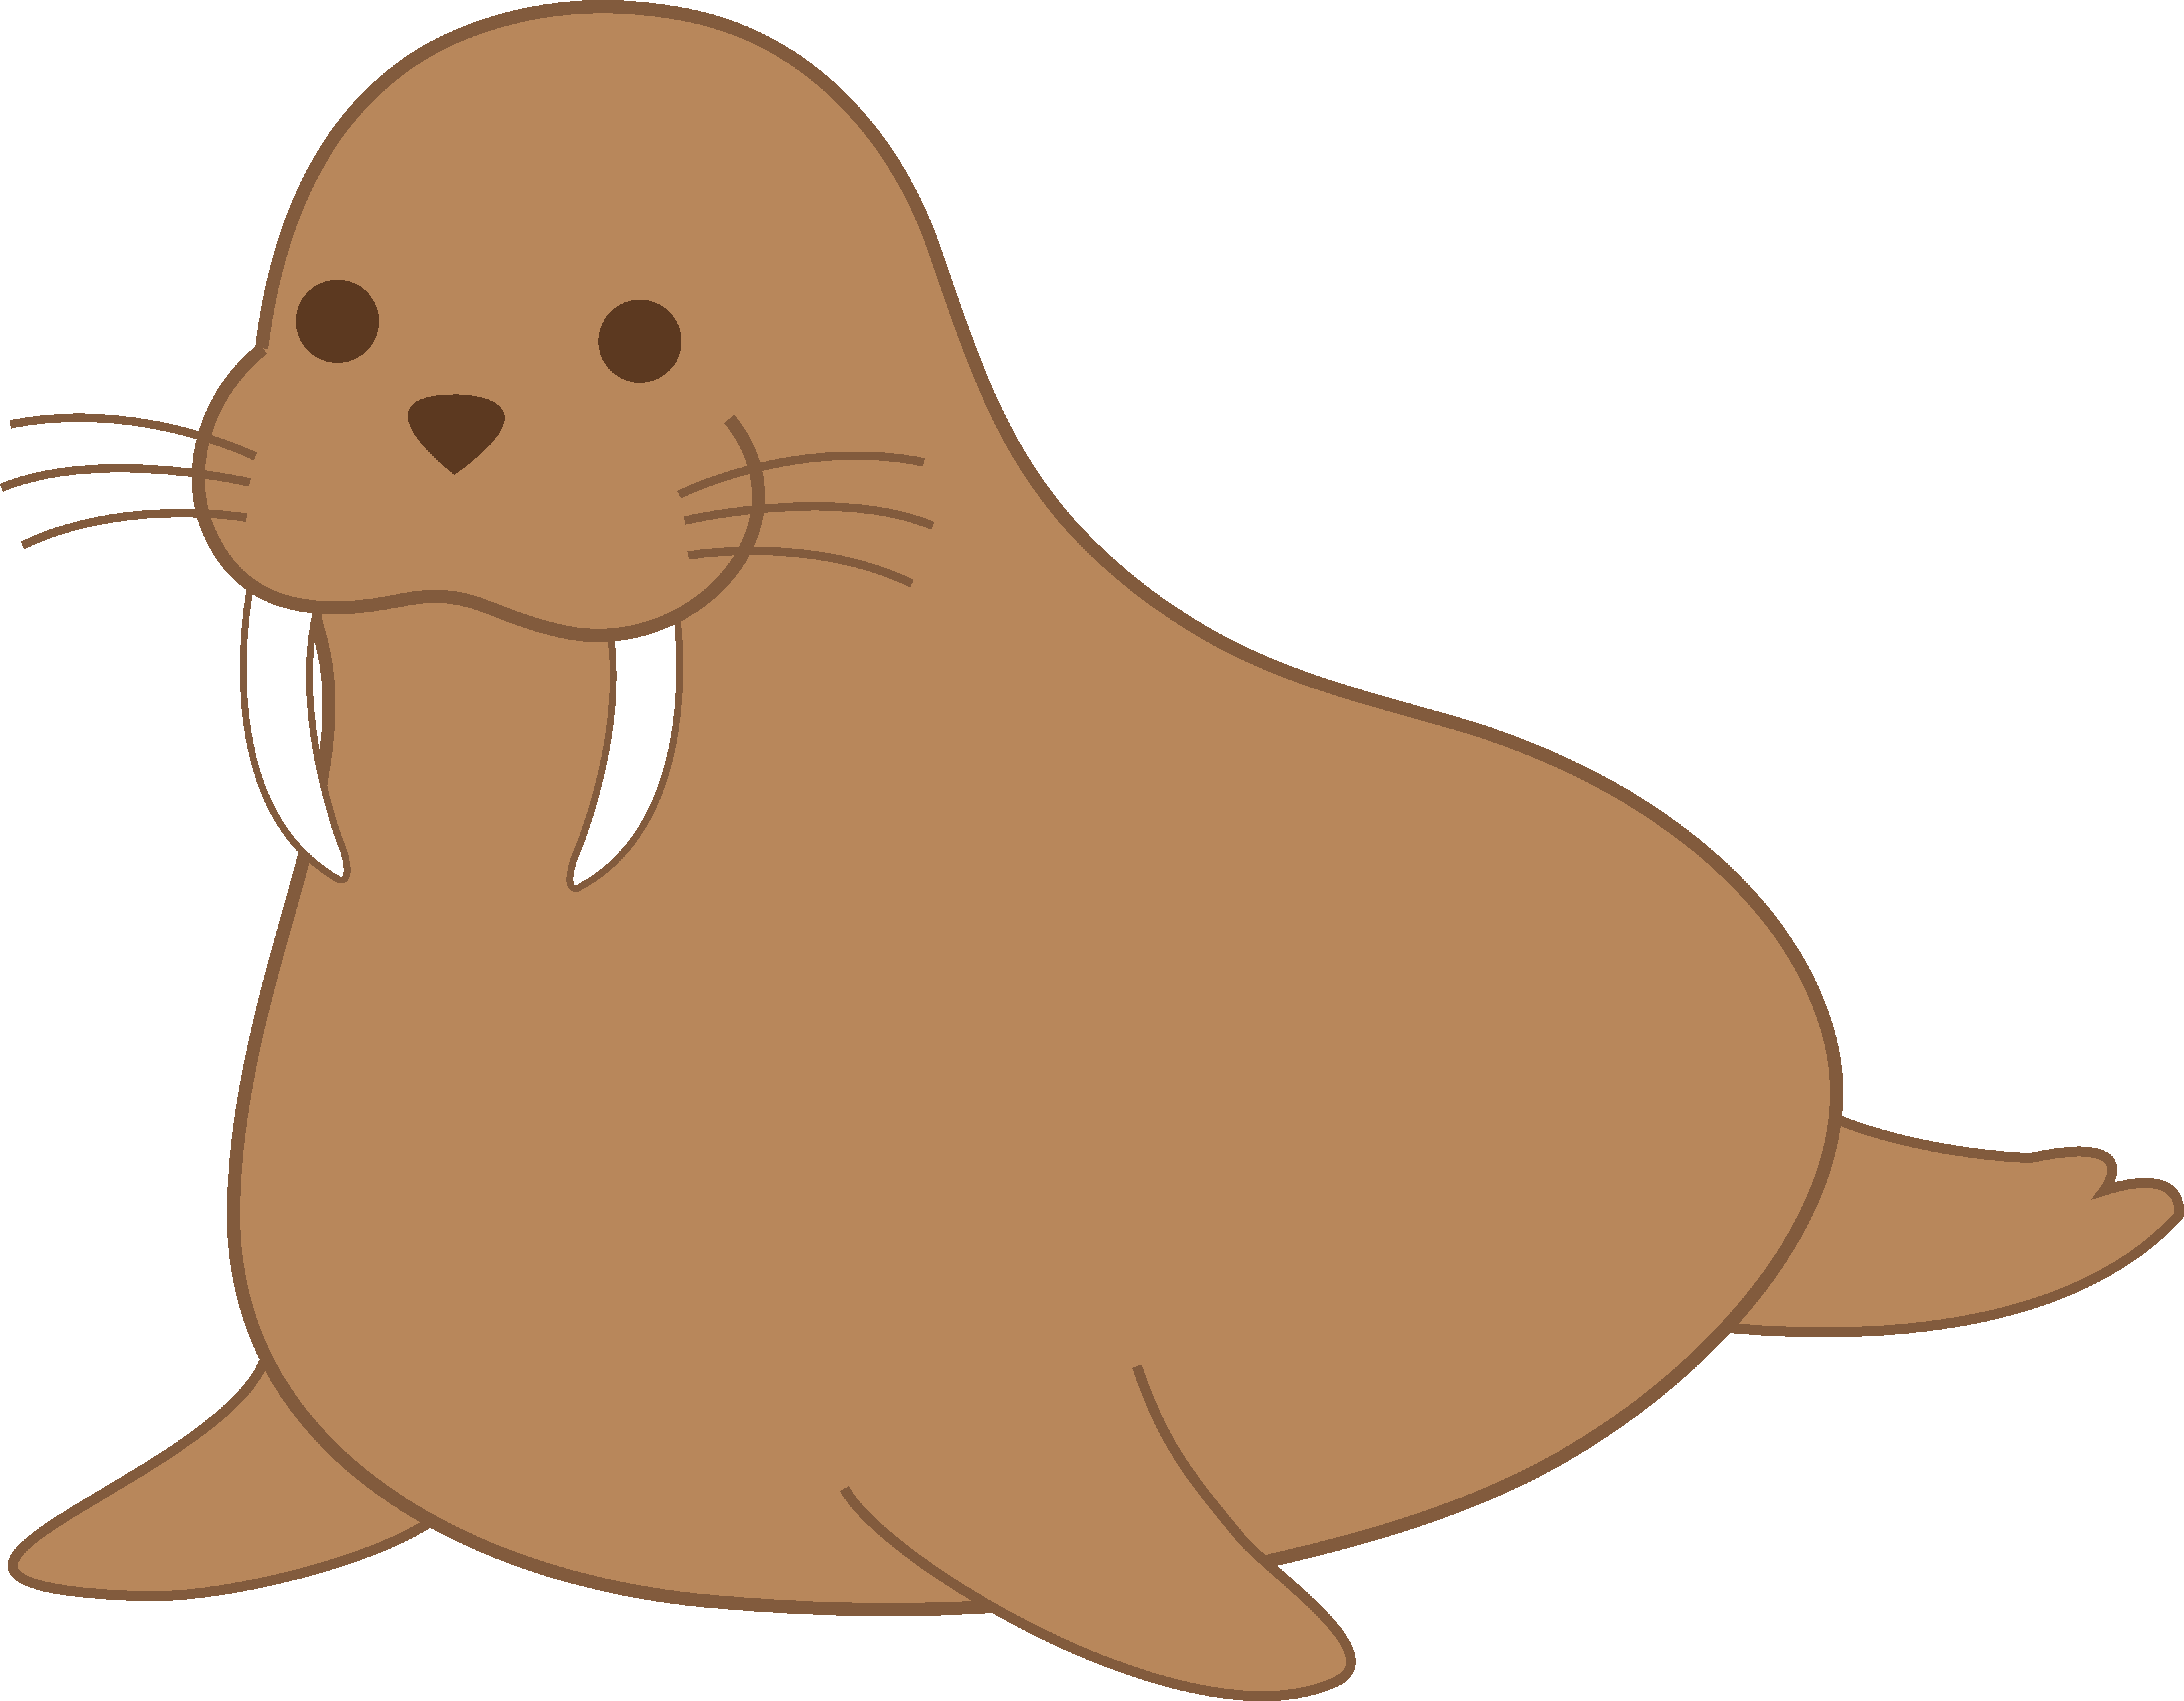 Free Walrus Pictures, Download Free Clip Art, Free Clip Art.